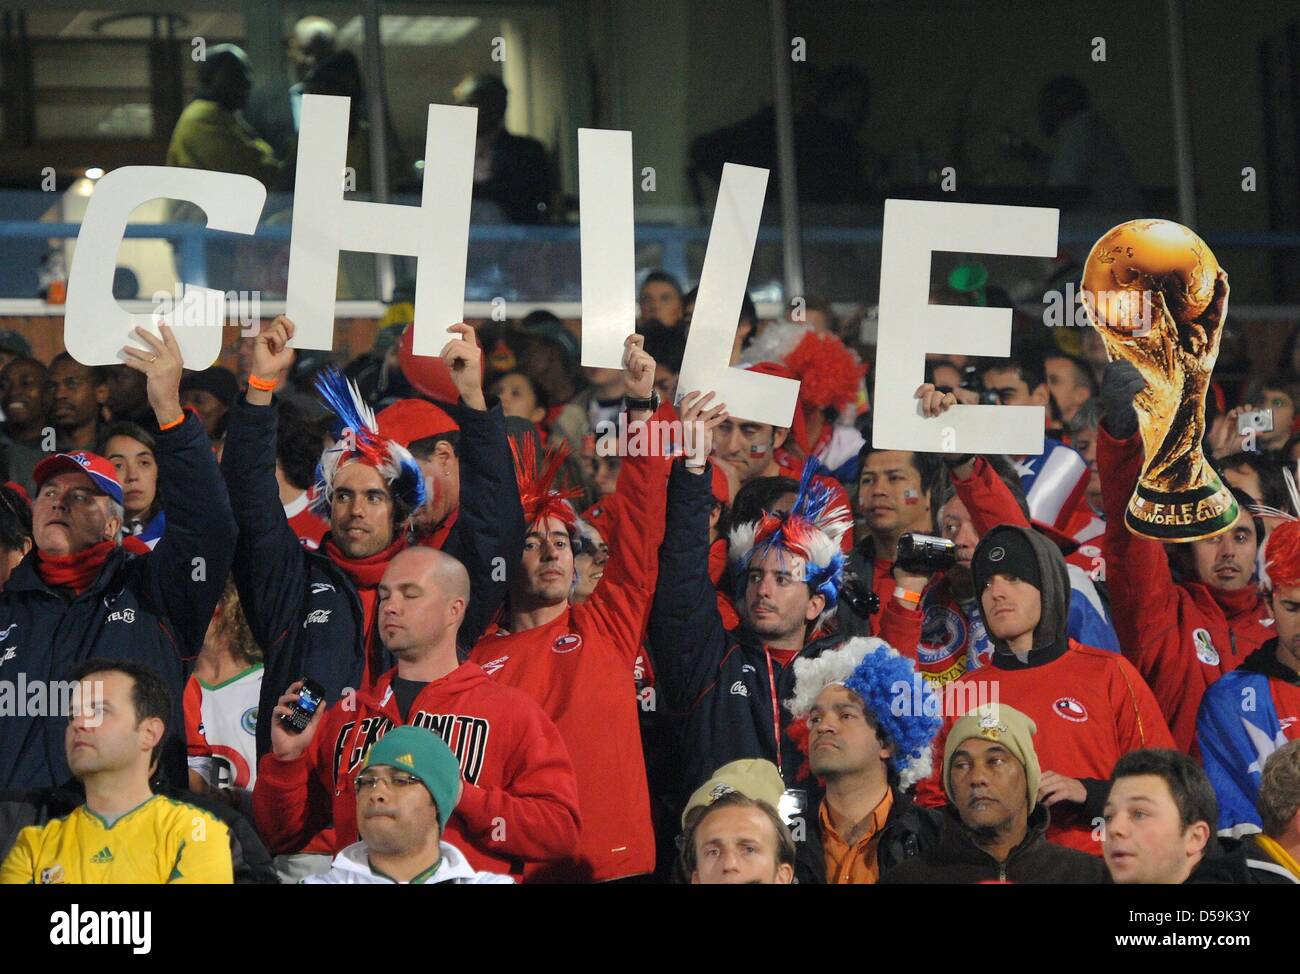 Chile fans celebrate on the stand during the 2010 FIFA World Cup group H match between Chile and Spain at Loftus Versfeld Stadium in Pretoria, South Africa 25 June 2010. Photo: Marcus Brandt dpa - Please refer to http://dpaq.de/FIFA-WM2010-TC Stock Photo